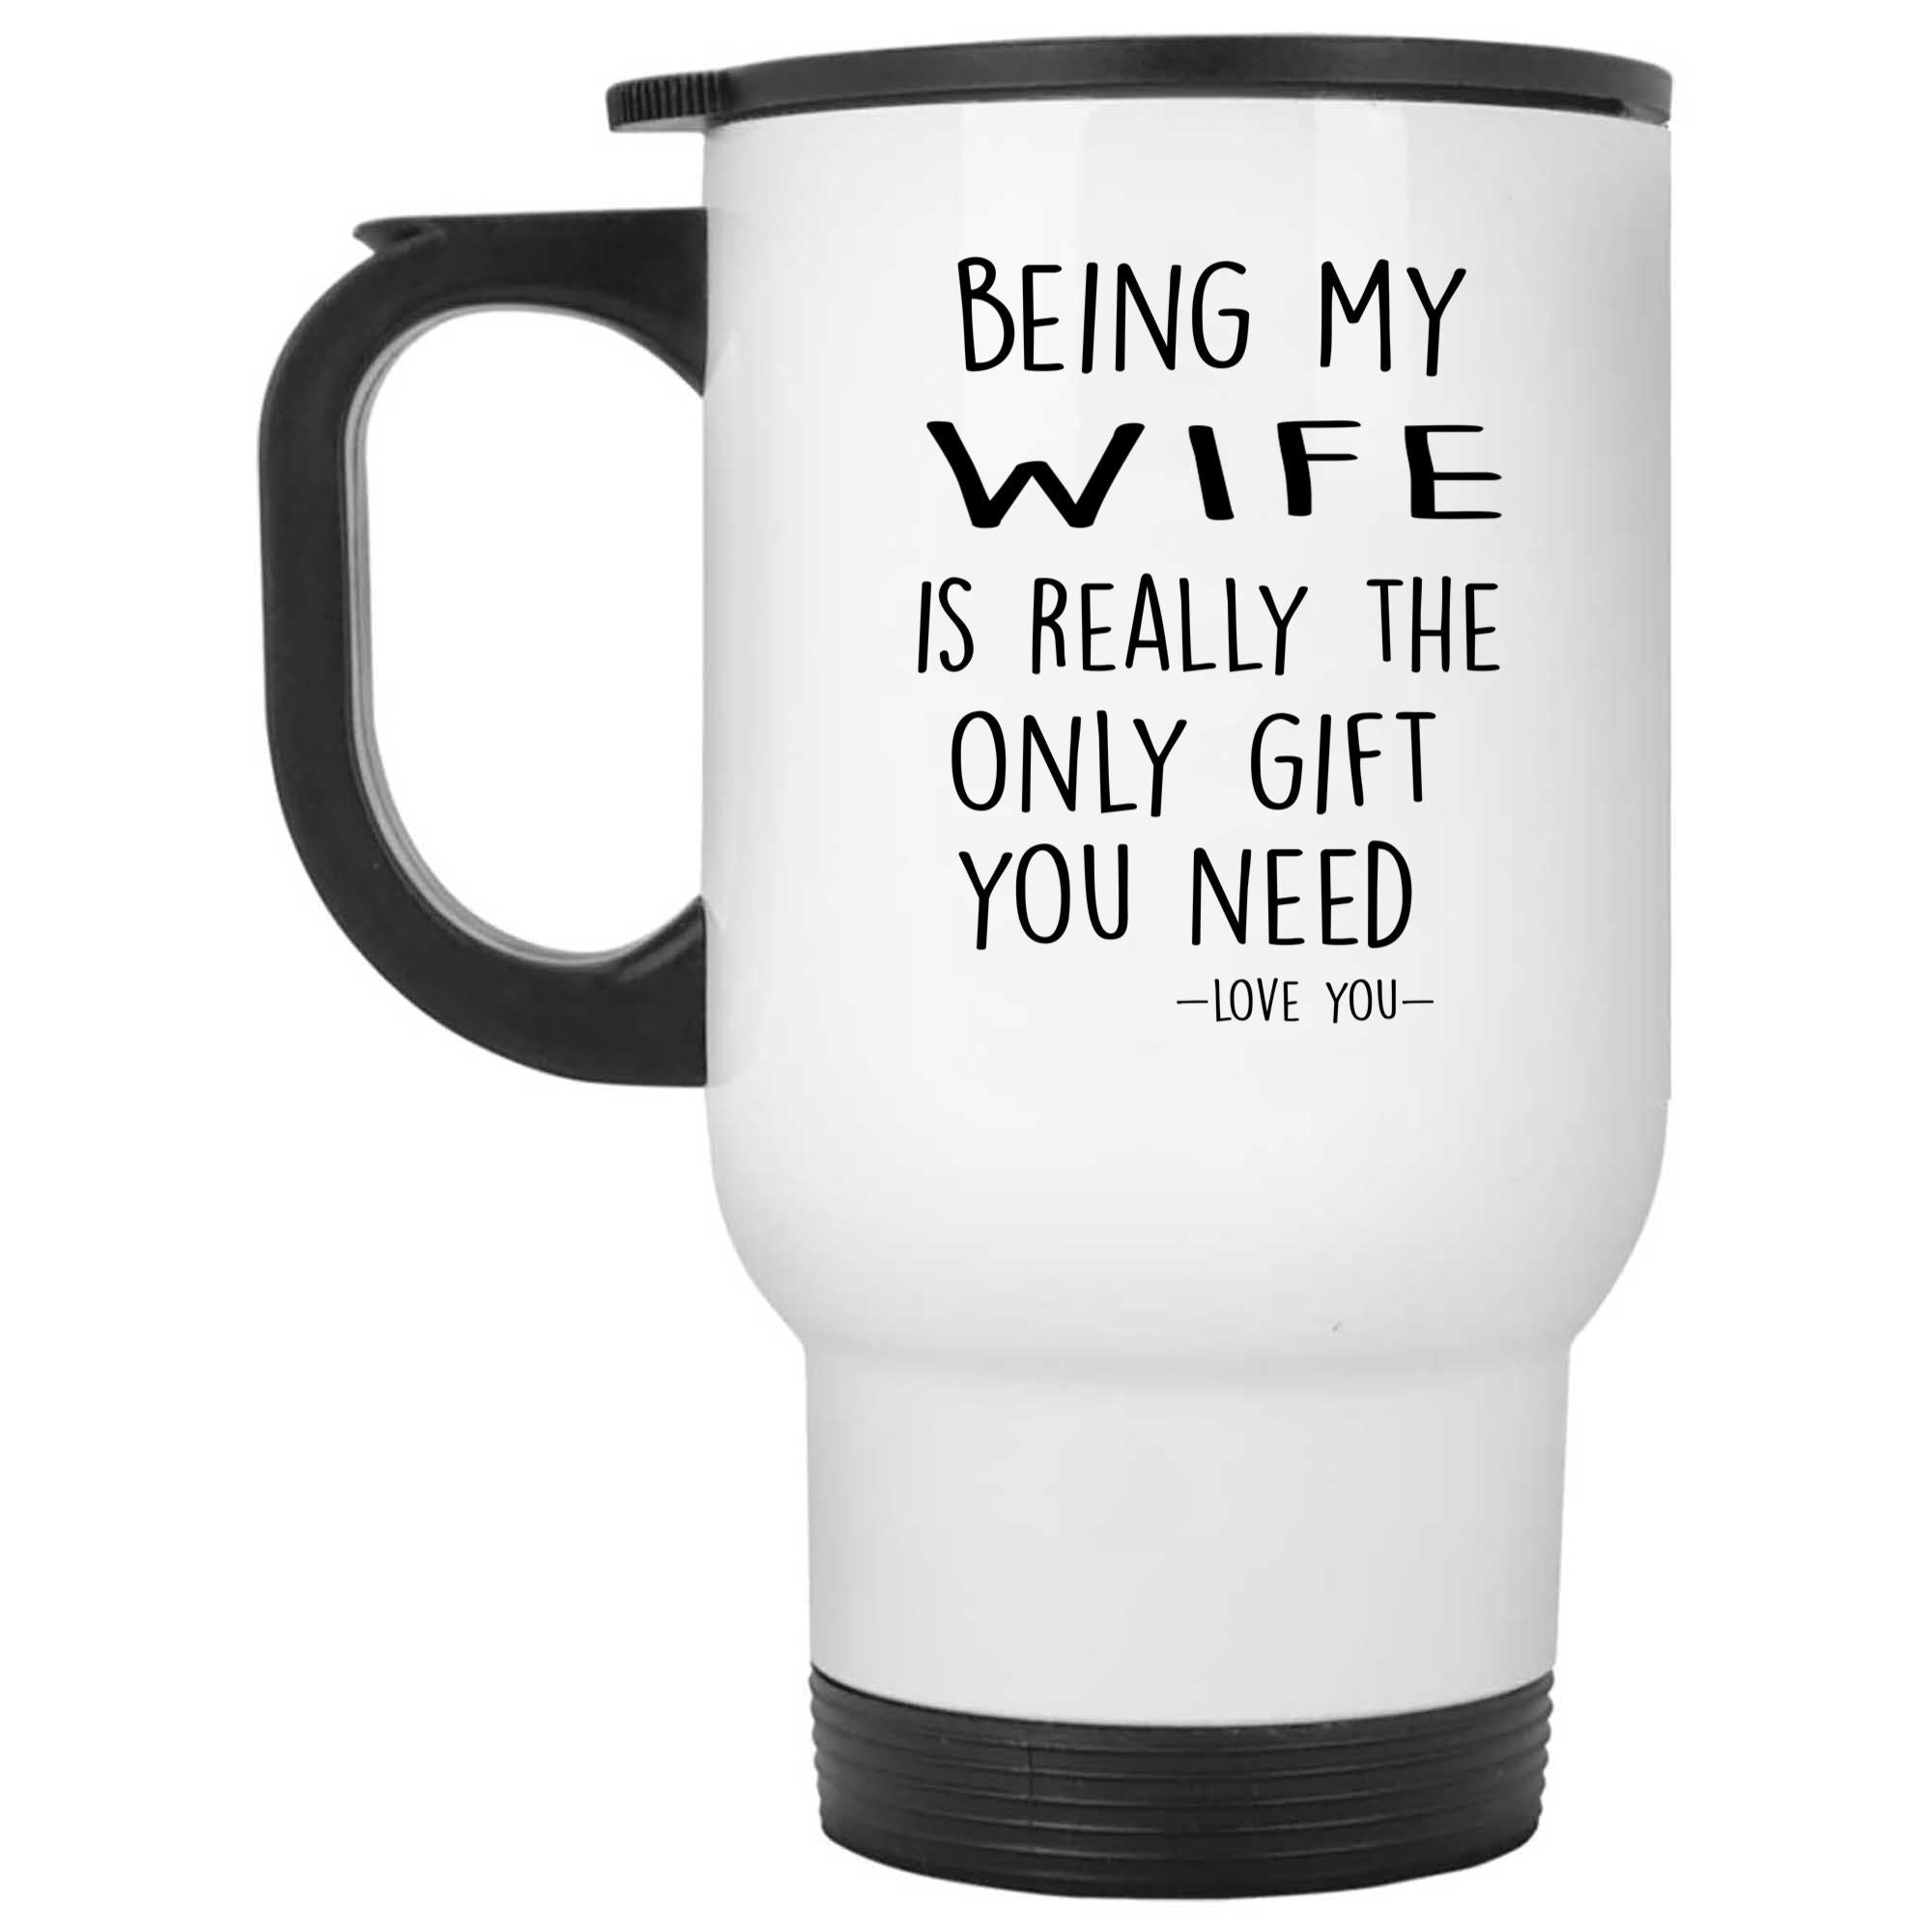 Skitongifts Funny Ceramic Novelty Coffee Mug Being My Wife Is Really The Only Gift You Need - Love You Wife Funny Gift Hb3Zng4